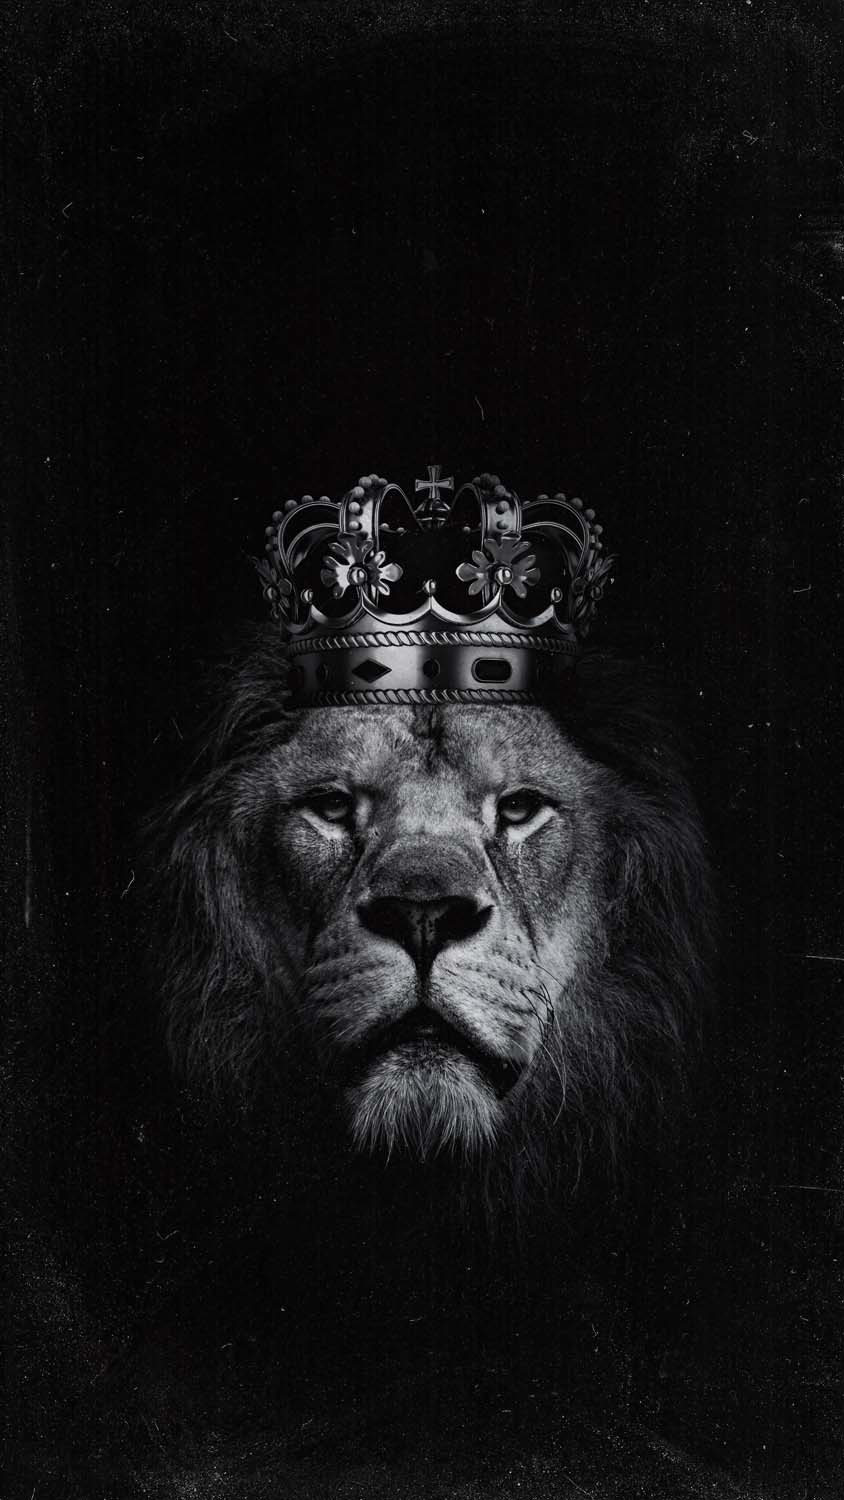 Lion Crown IPhone Wallpaper HD - IPhone Wallpapers : iPhone Wallpapers